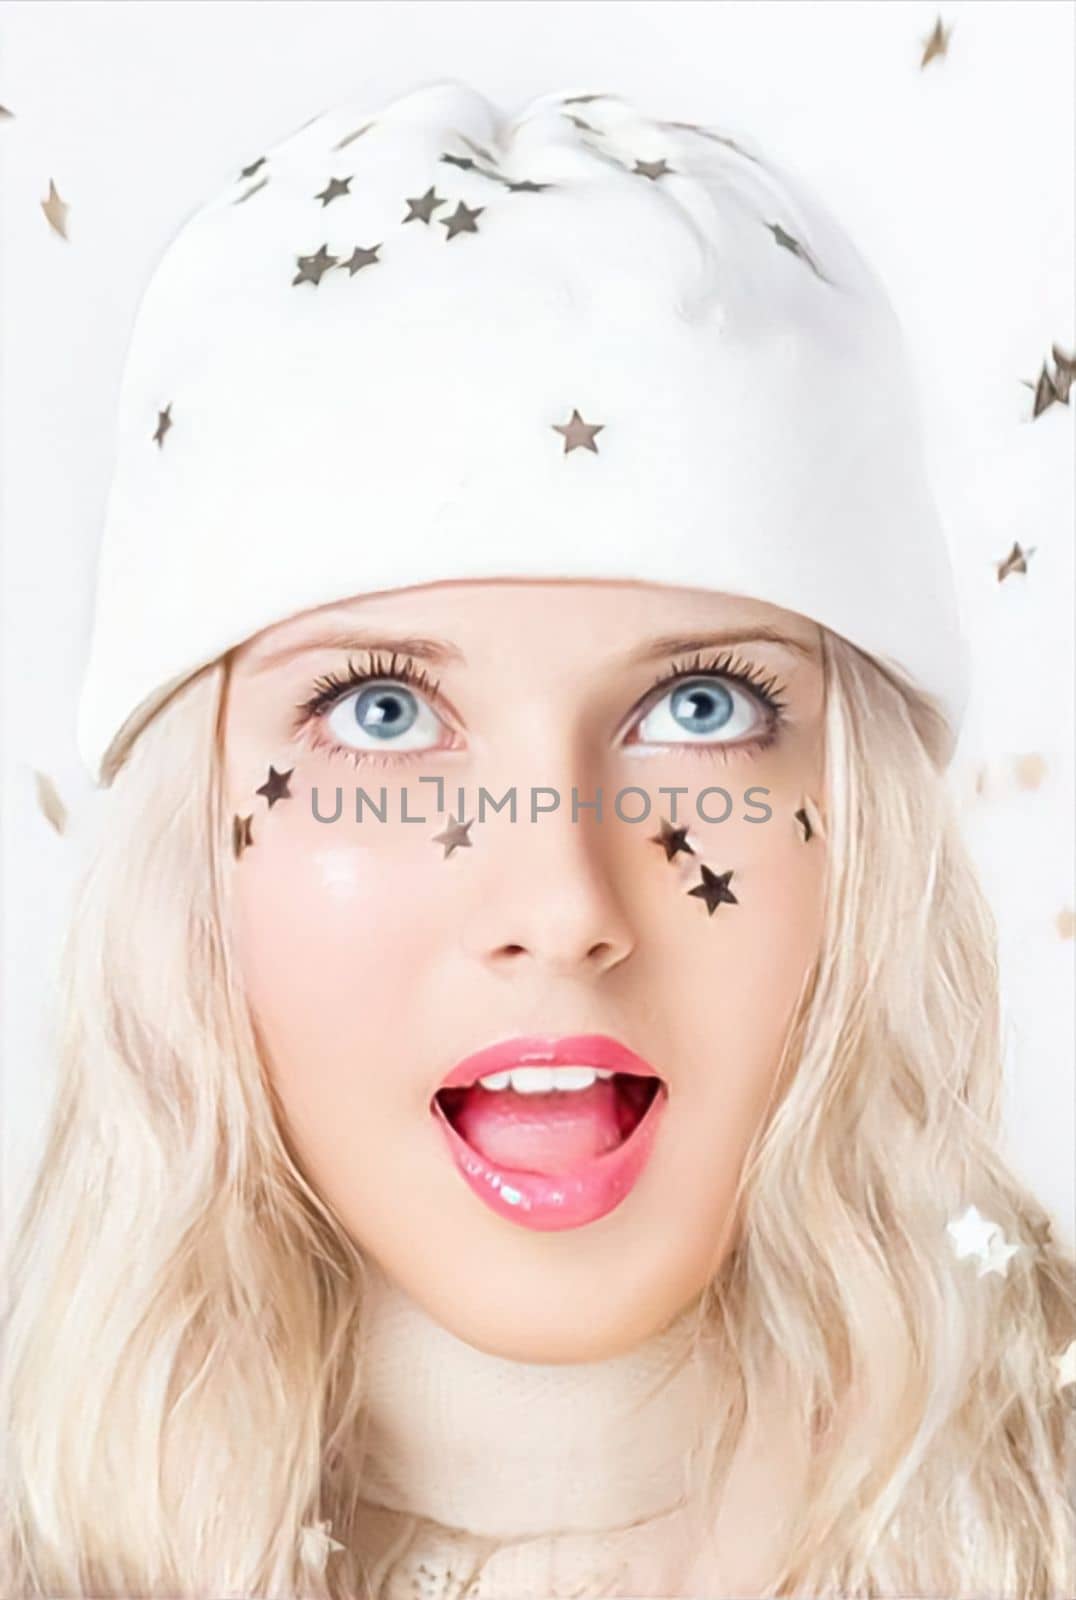 Merry Christmas, happy holidays, a woman playing with confetti stars while wearing a white benny hat, festivity and beauty. Funny blonde girl smiling in a studio portrait as she enjoys the winter holidays, including Christmas and New Year's.